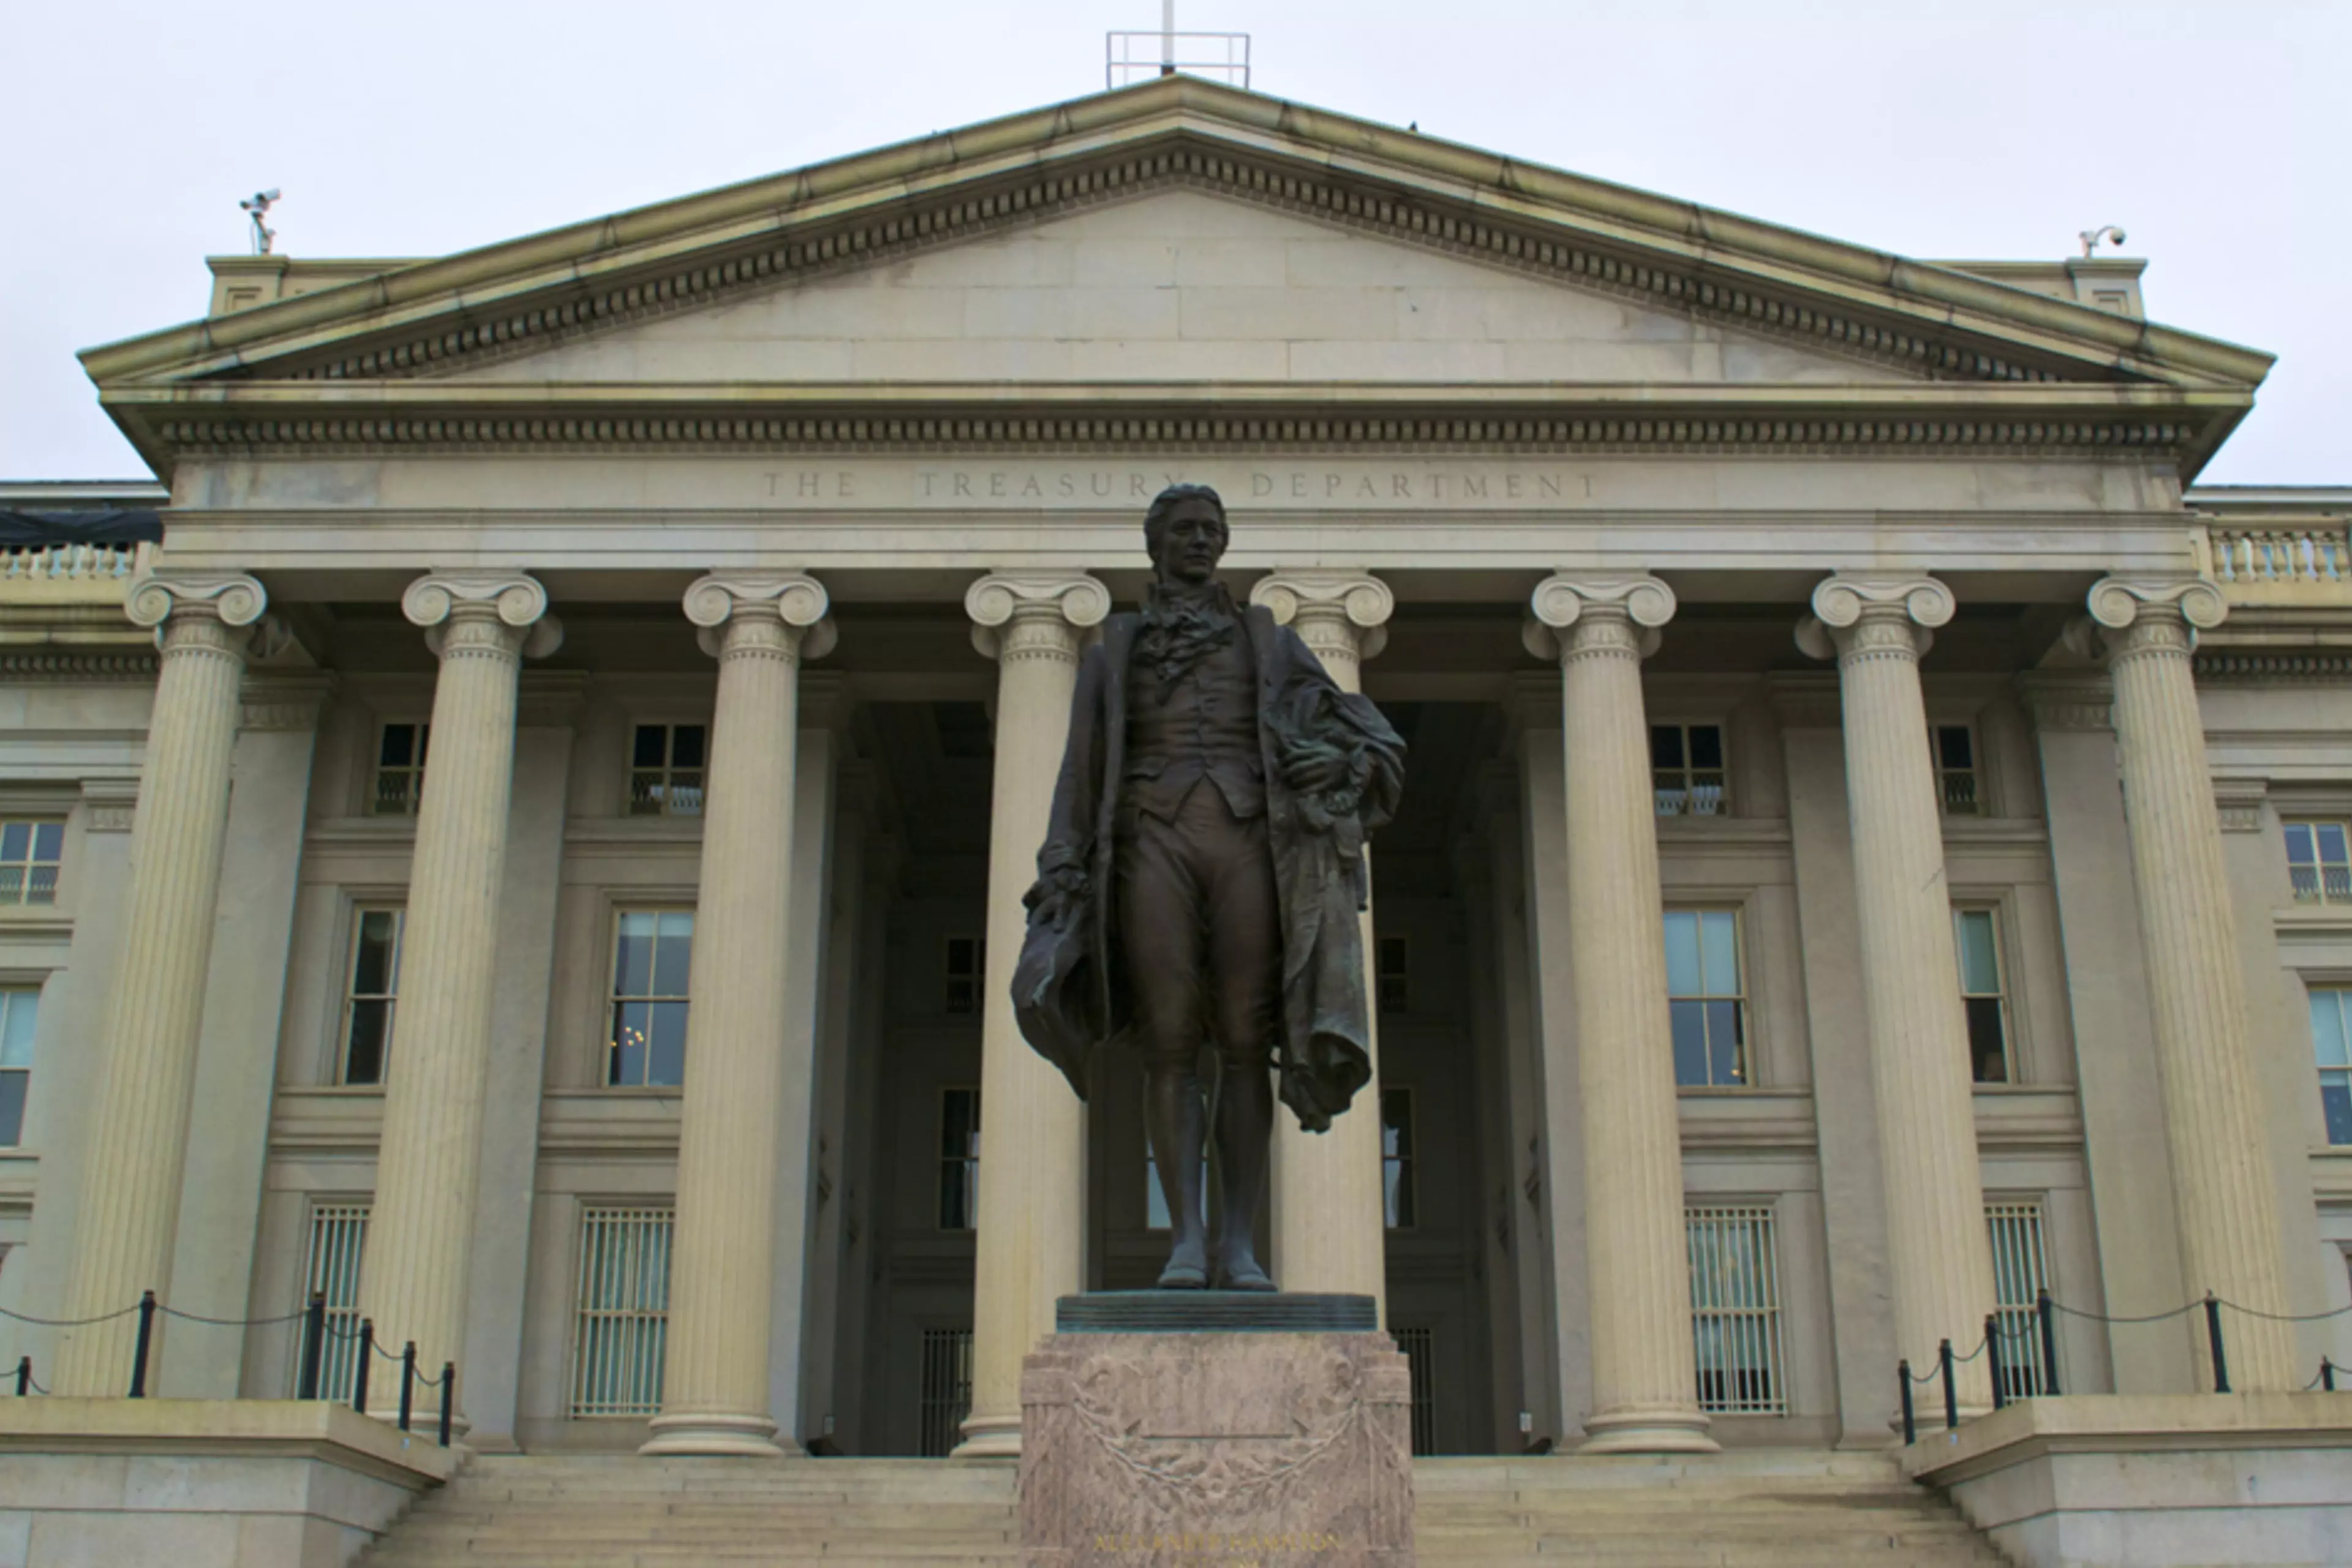 A statue of Alexander Hamilton in front of the U.S. Treasury Department headquarters in Washington, DC.